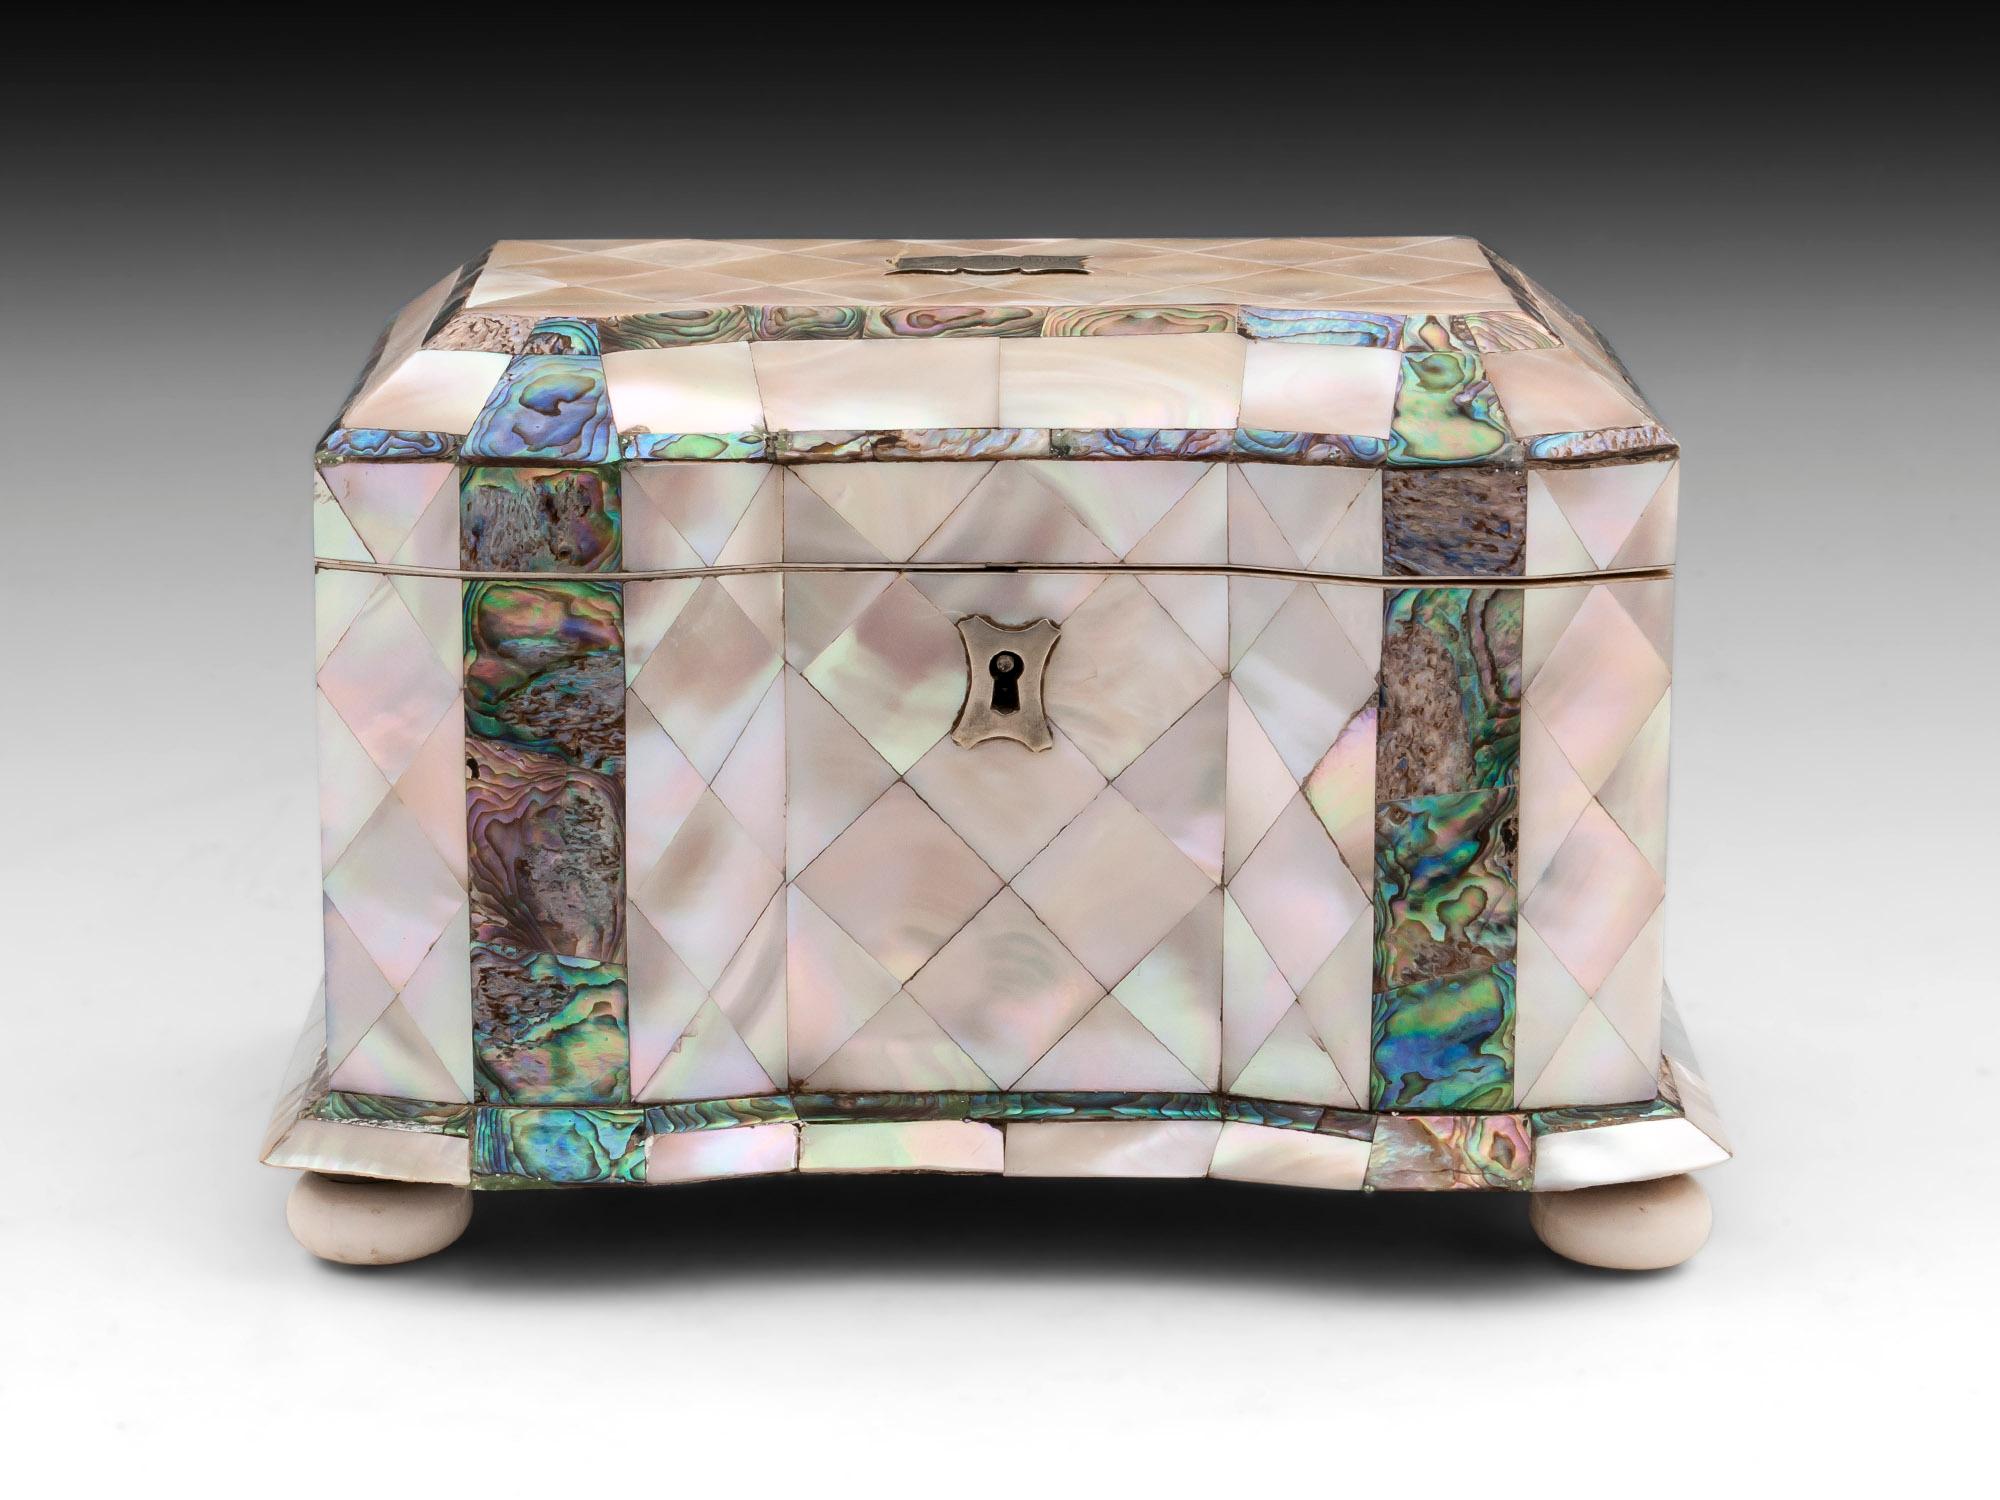 Antique tea caddy adorned with mother of pearl diamonds separated with thick bands of exquisite abalone. Standing on four turned bone bun feet. With an engraved plaque on the top.
The interior features a red velvet backing to the lid and has two